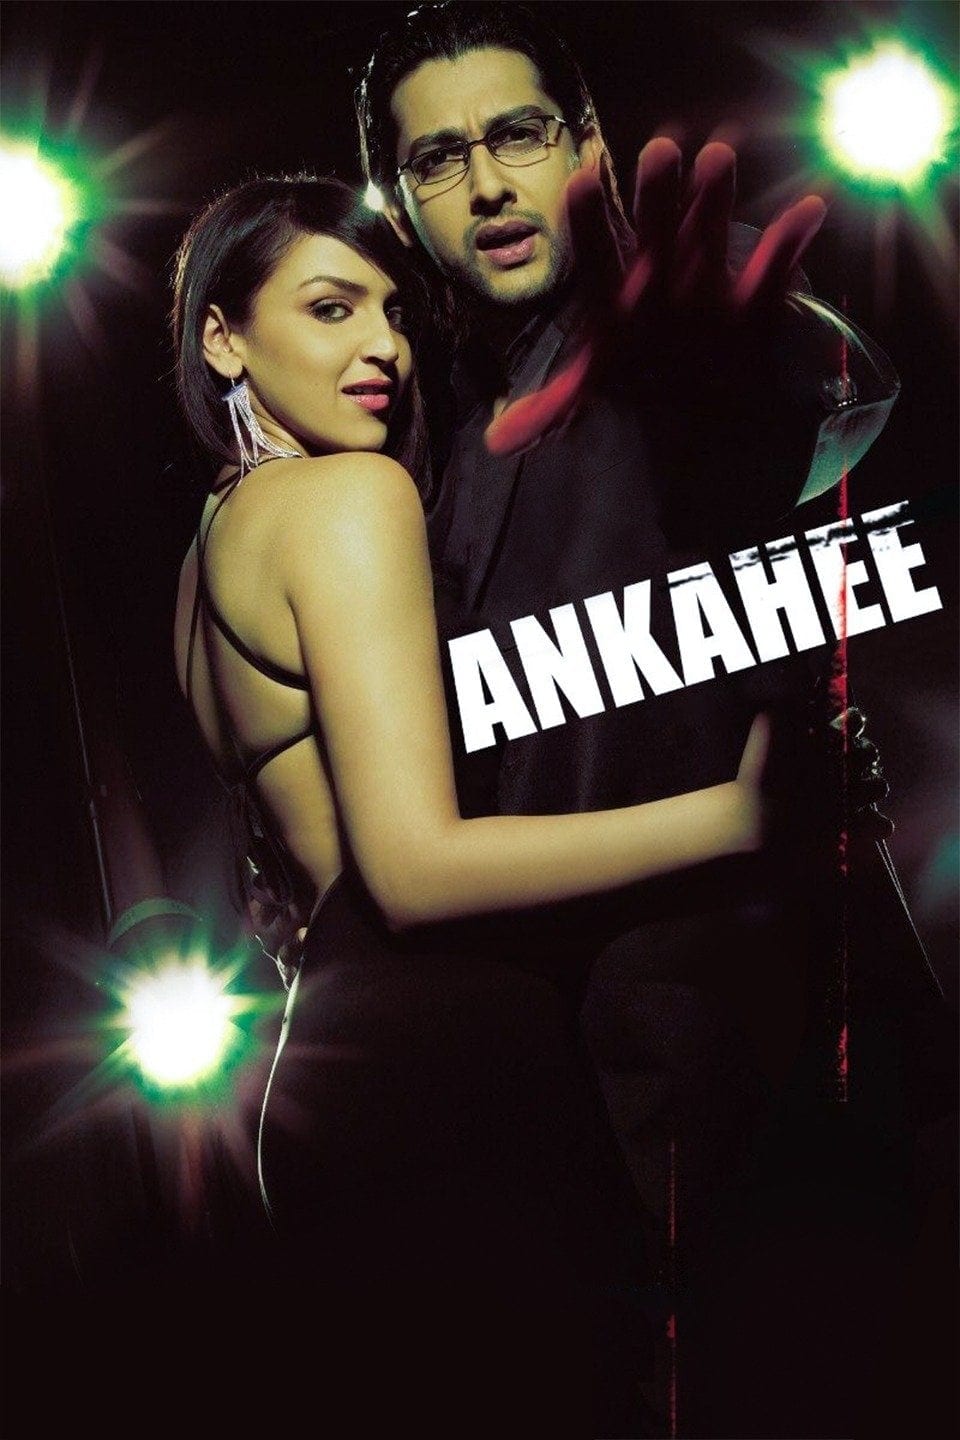 Poster for the movie "Ankahee"